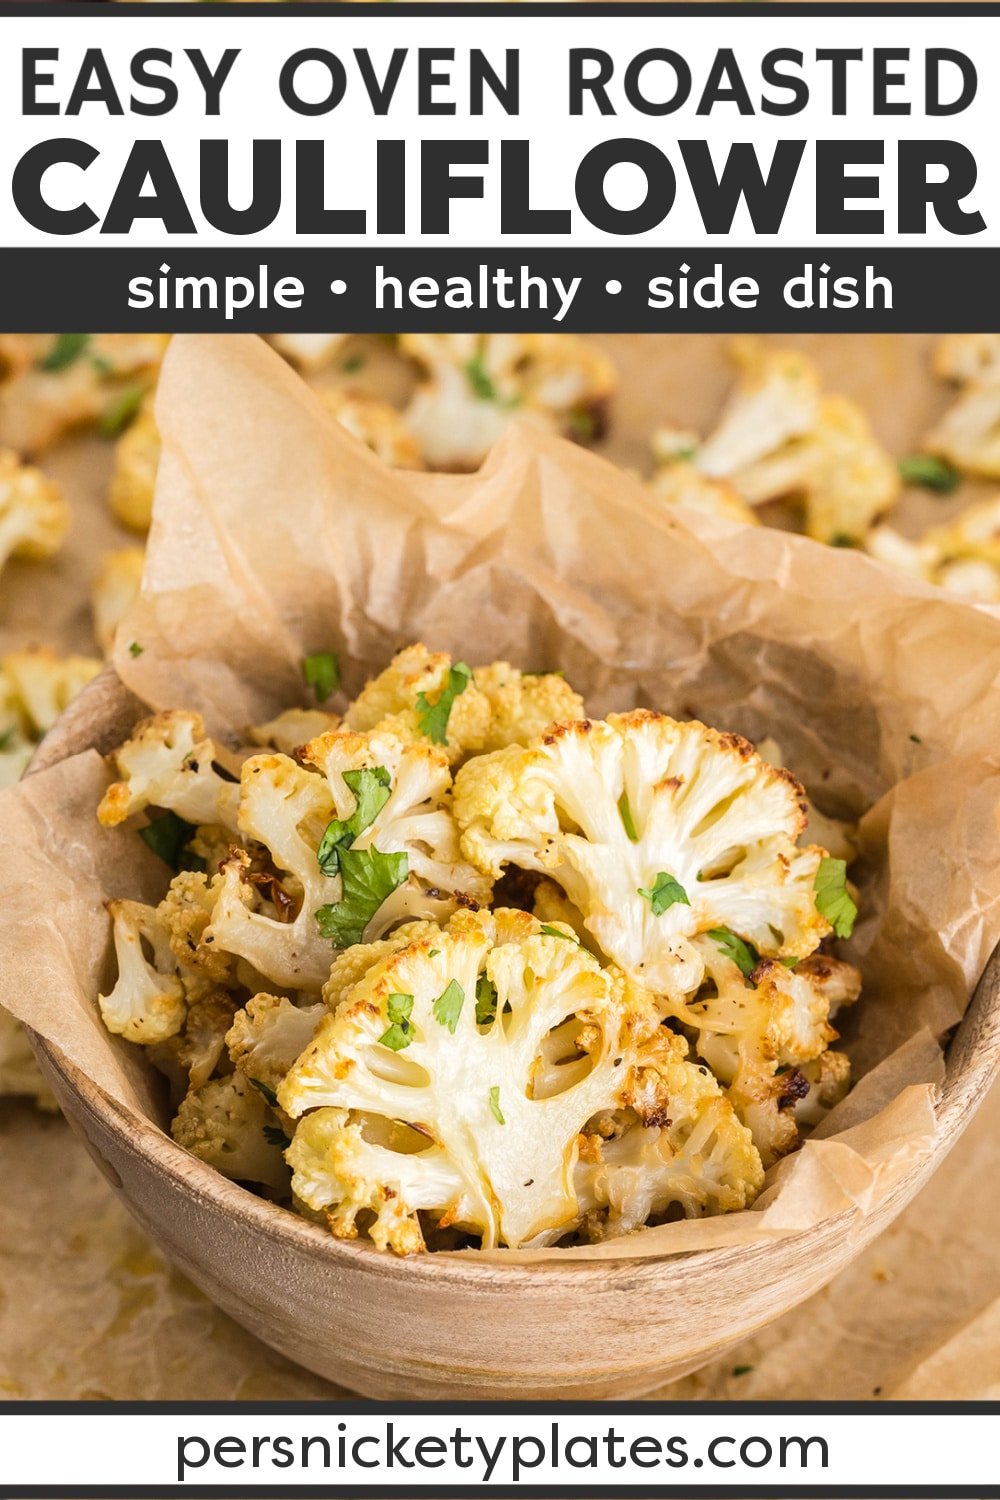 Roasted Cauliflower is a simple recipe that packs a ton of flavor into each little floret. Sprinkled with salt, pepper, and cumin, then finished with fresh lemon juice, this 5-ingredient side dish is ready in 30 minutes! Not only is it healthy and delicious, but the seasoning can be customized to suit your tastes! | www.persnicketyplates.com